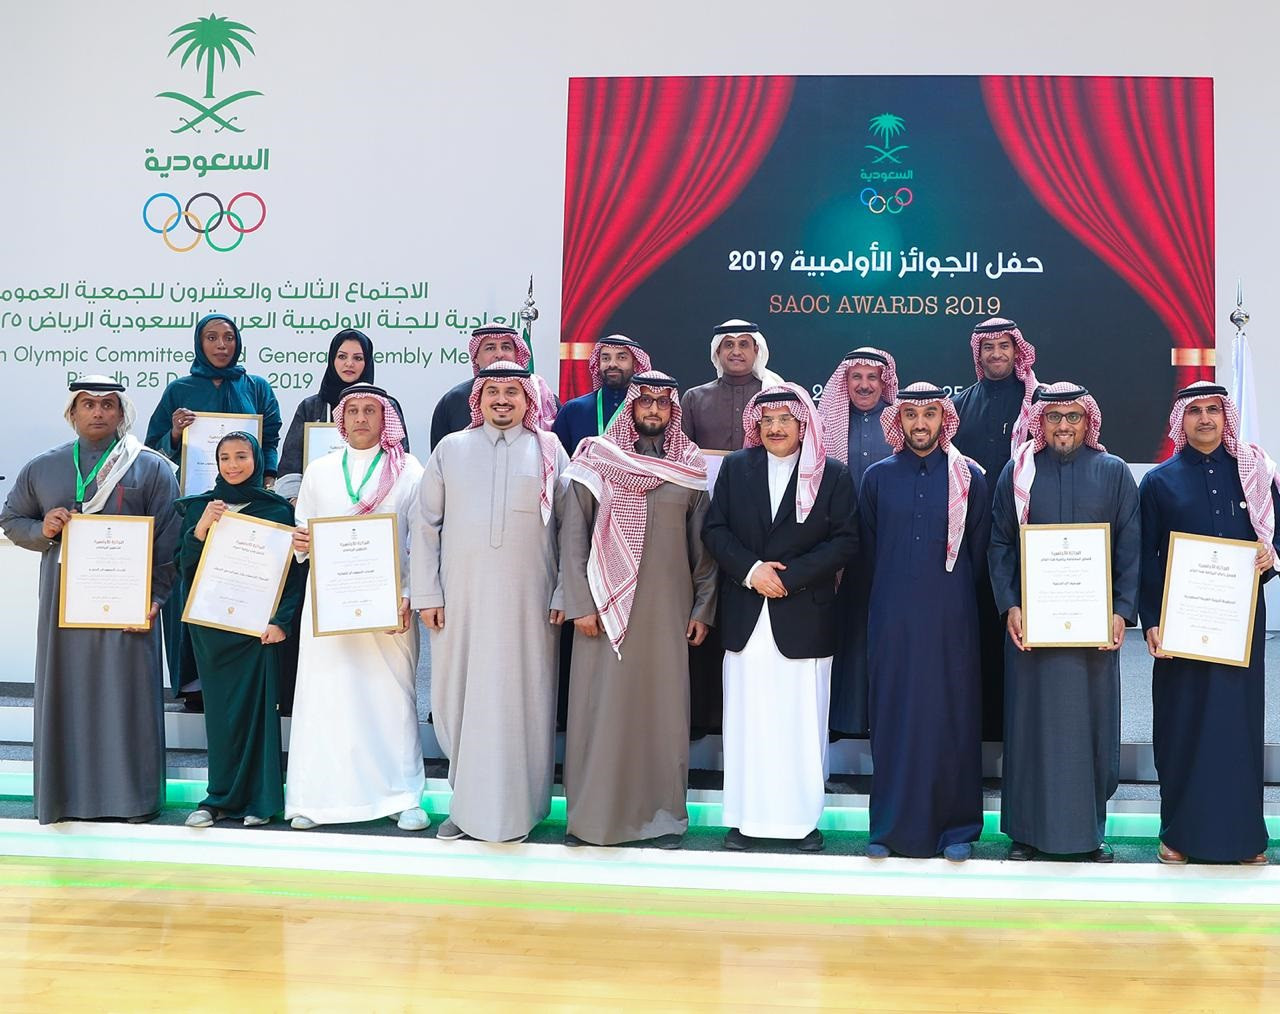 Saudi Arabian Olympic Committee Awards held for first time